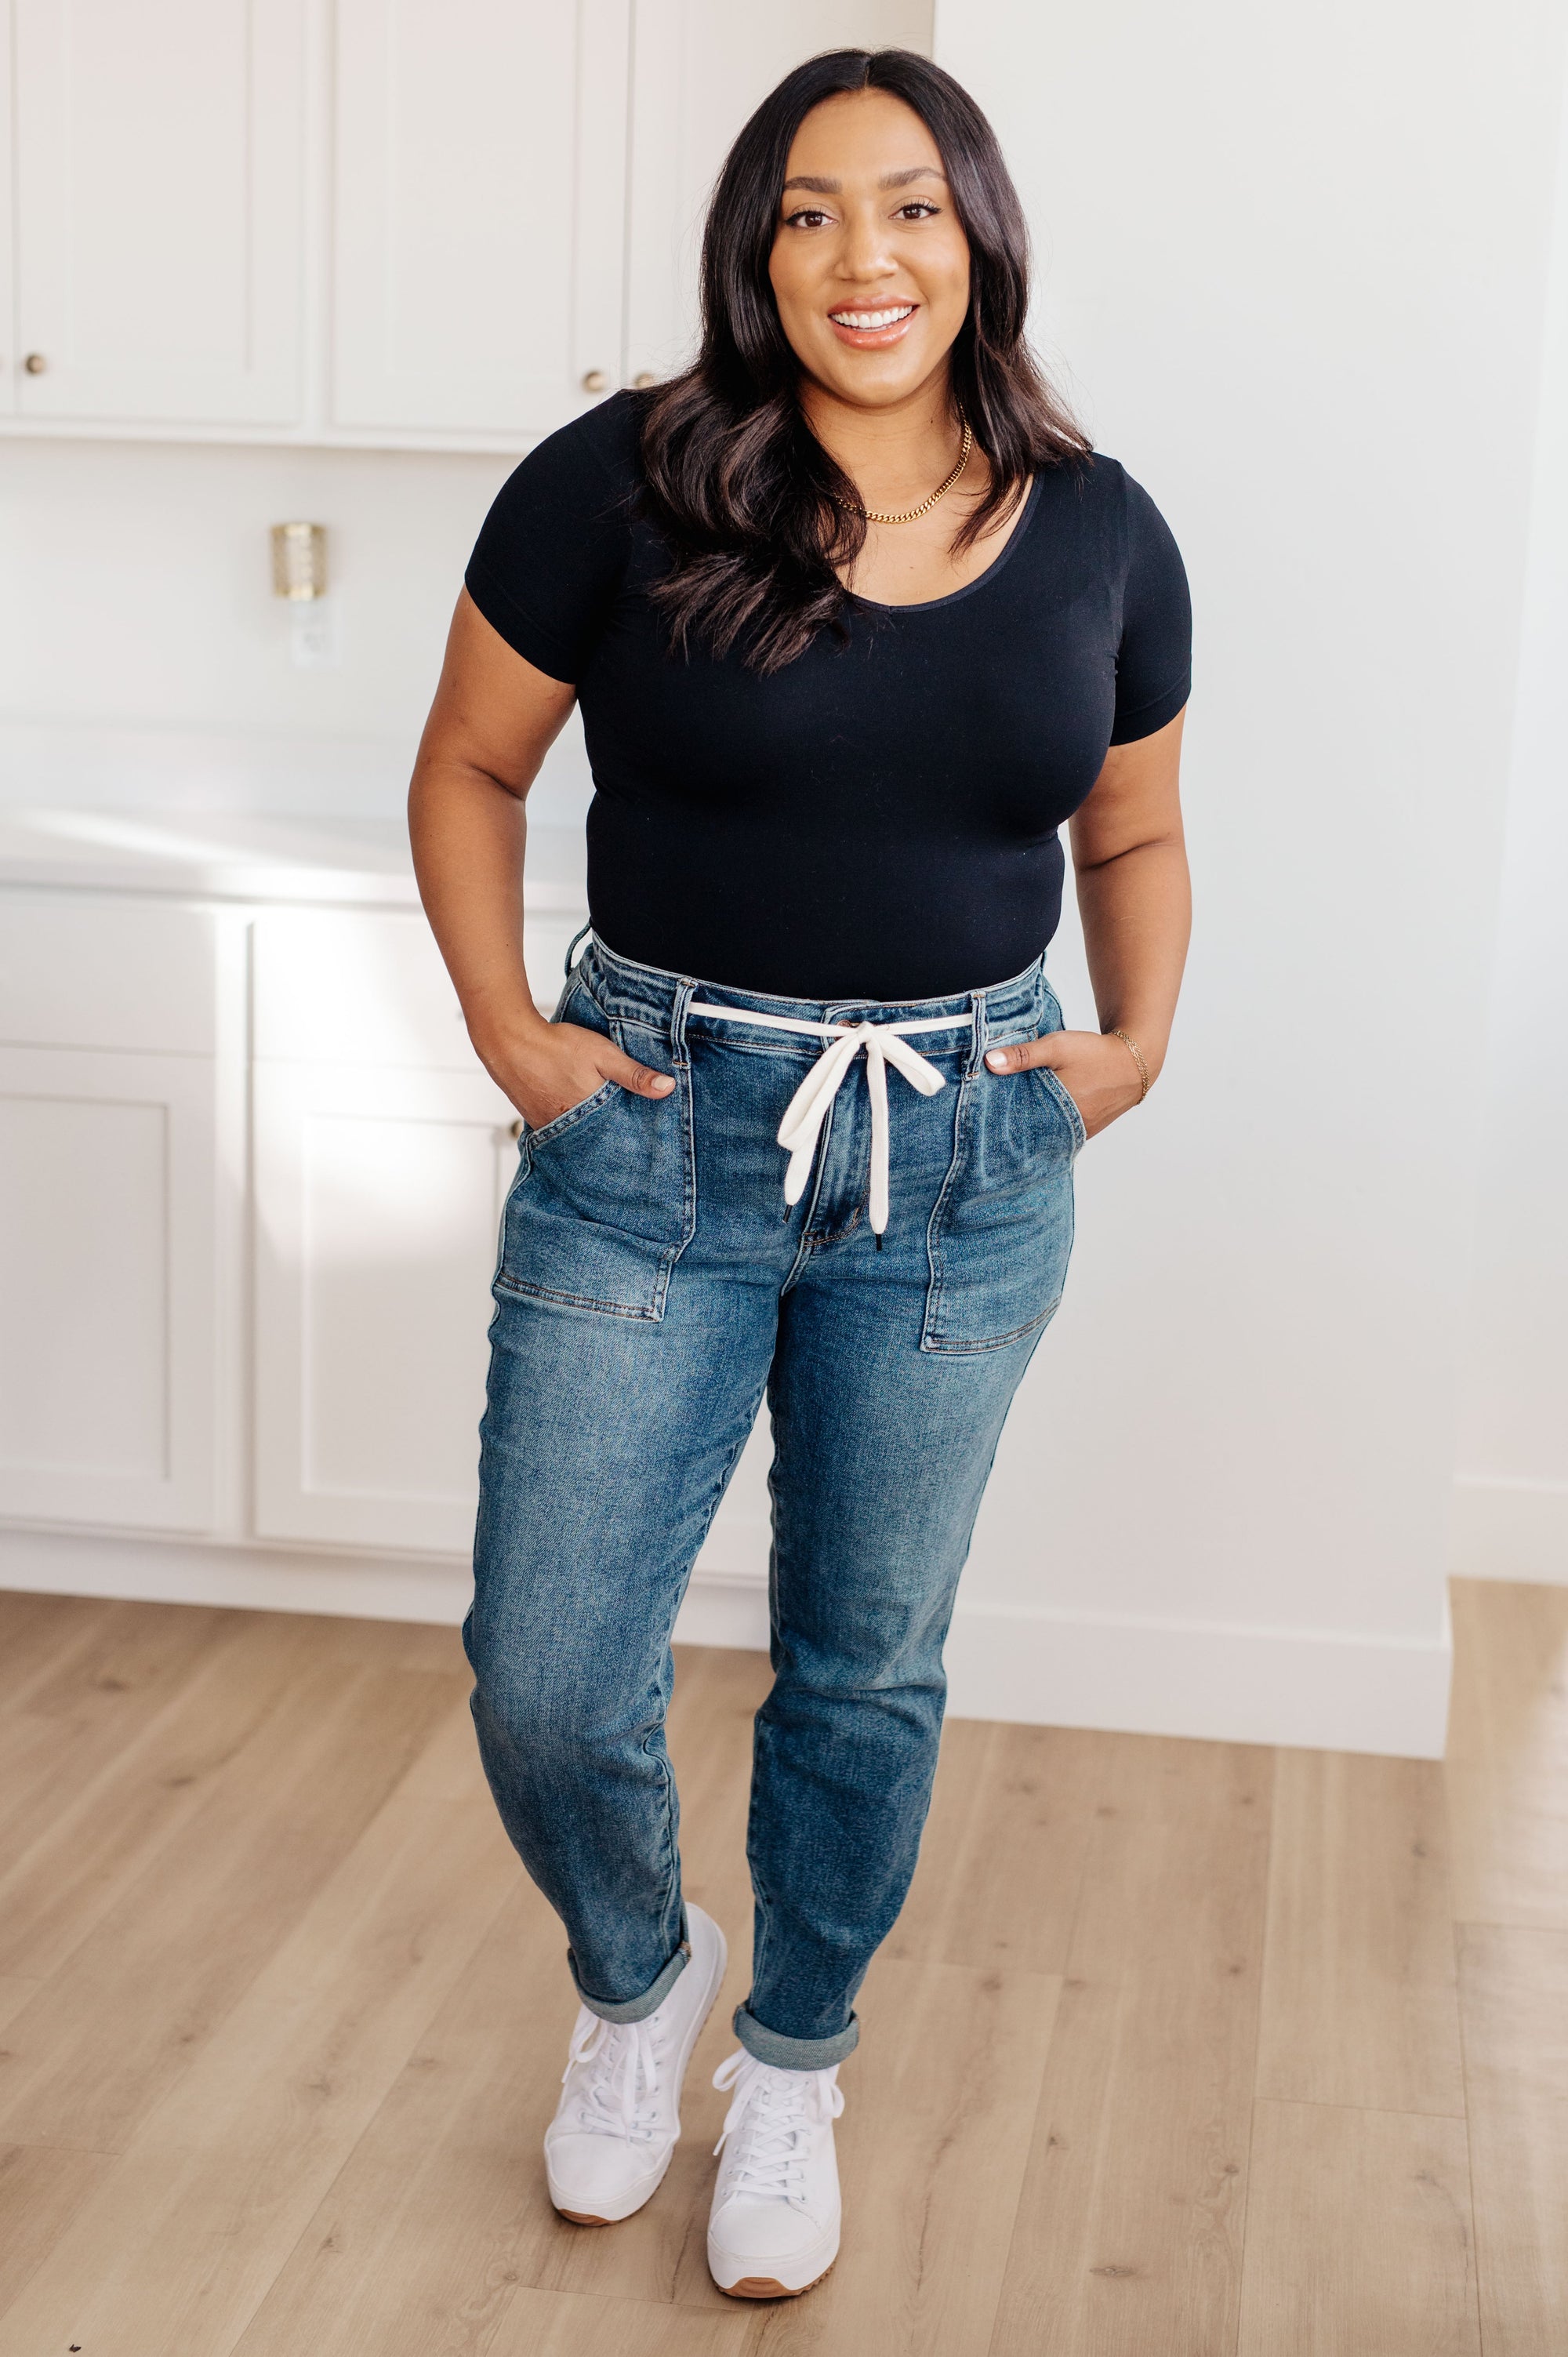 How to style DENIM JOGGERS | Outfit inspiration | Plus Size - YouTube